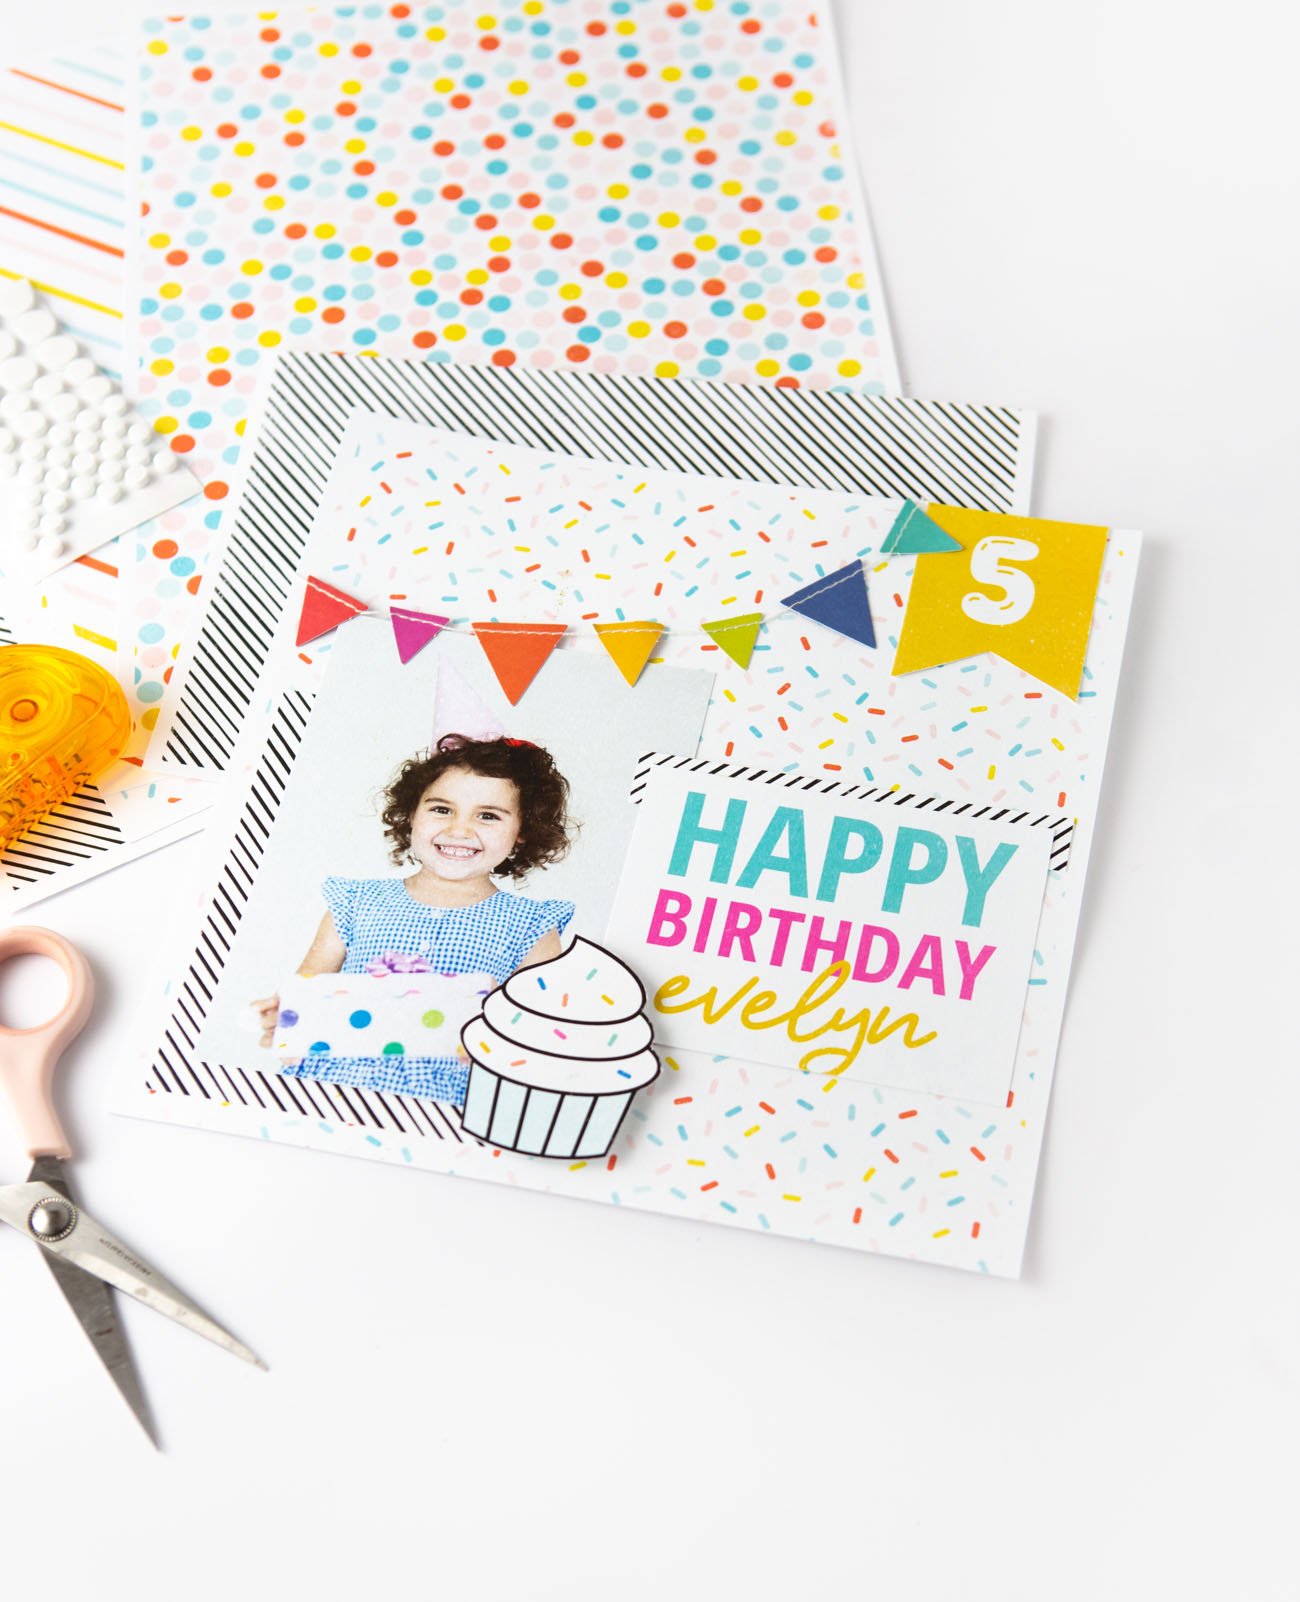 Colorful rainbow scrapbook page design with Happy Birthday text, cupcake, and banner